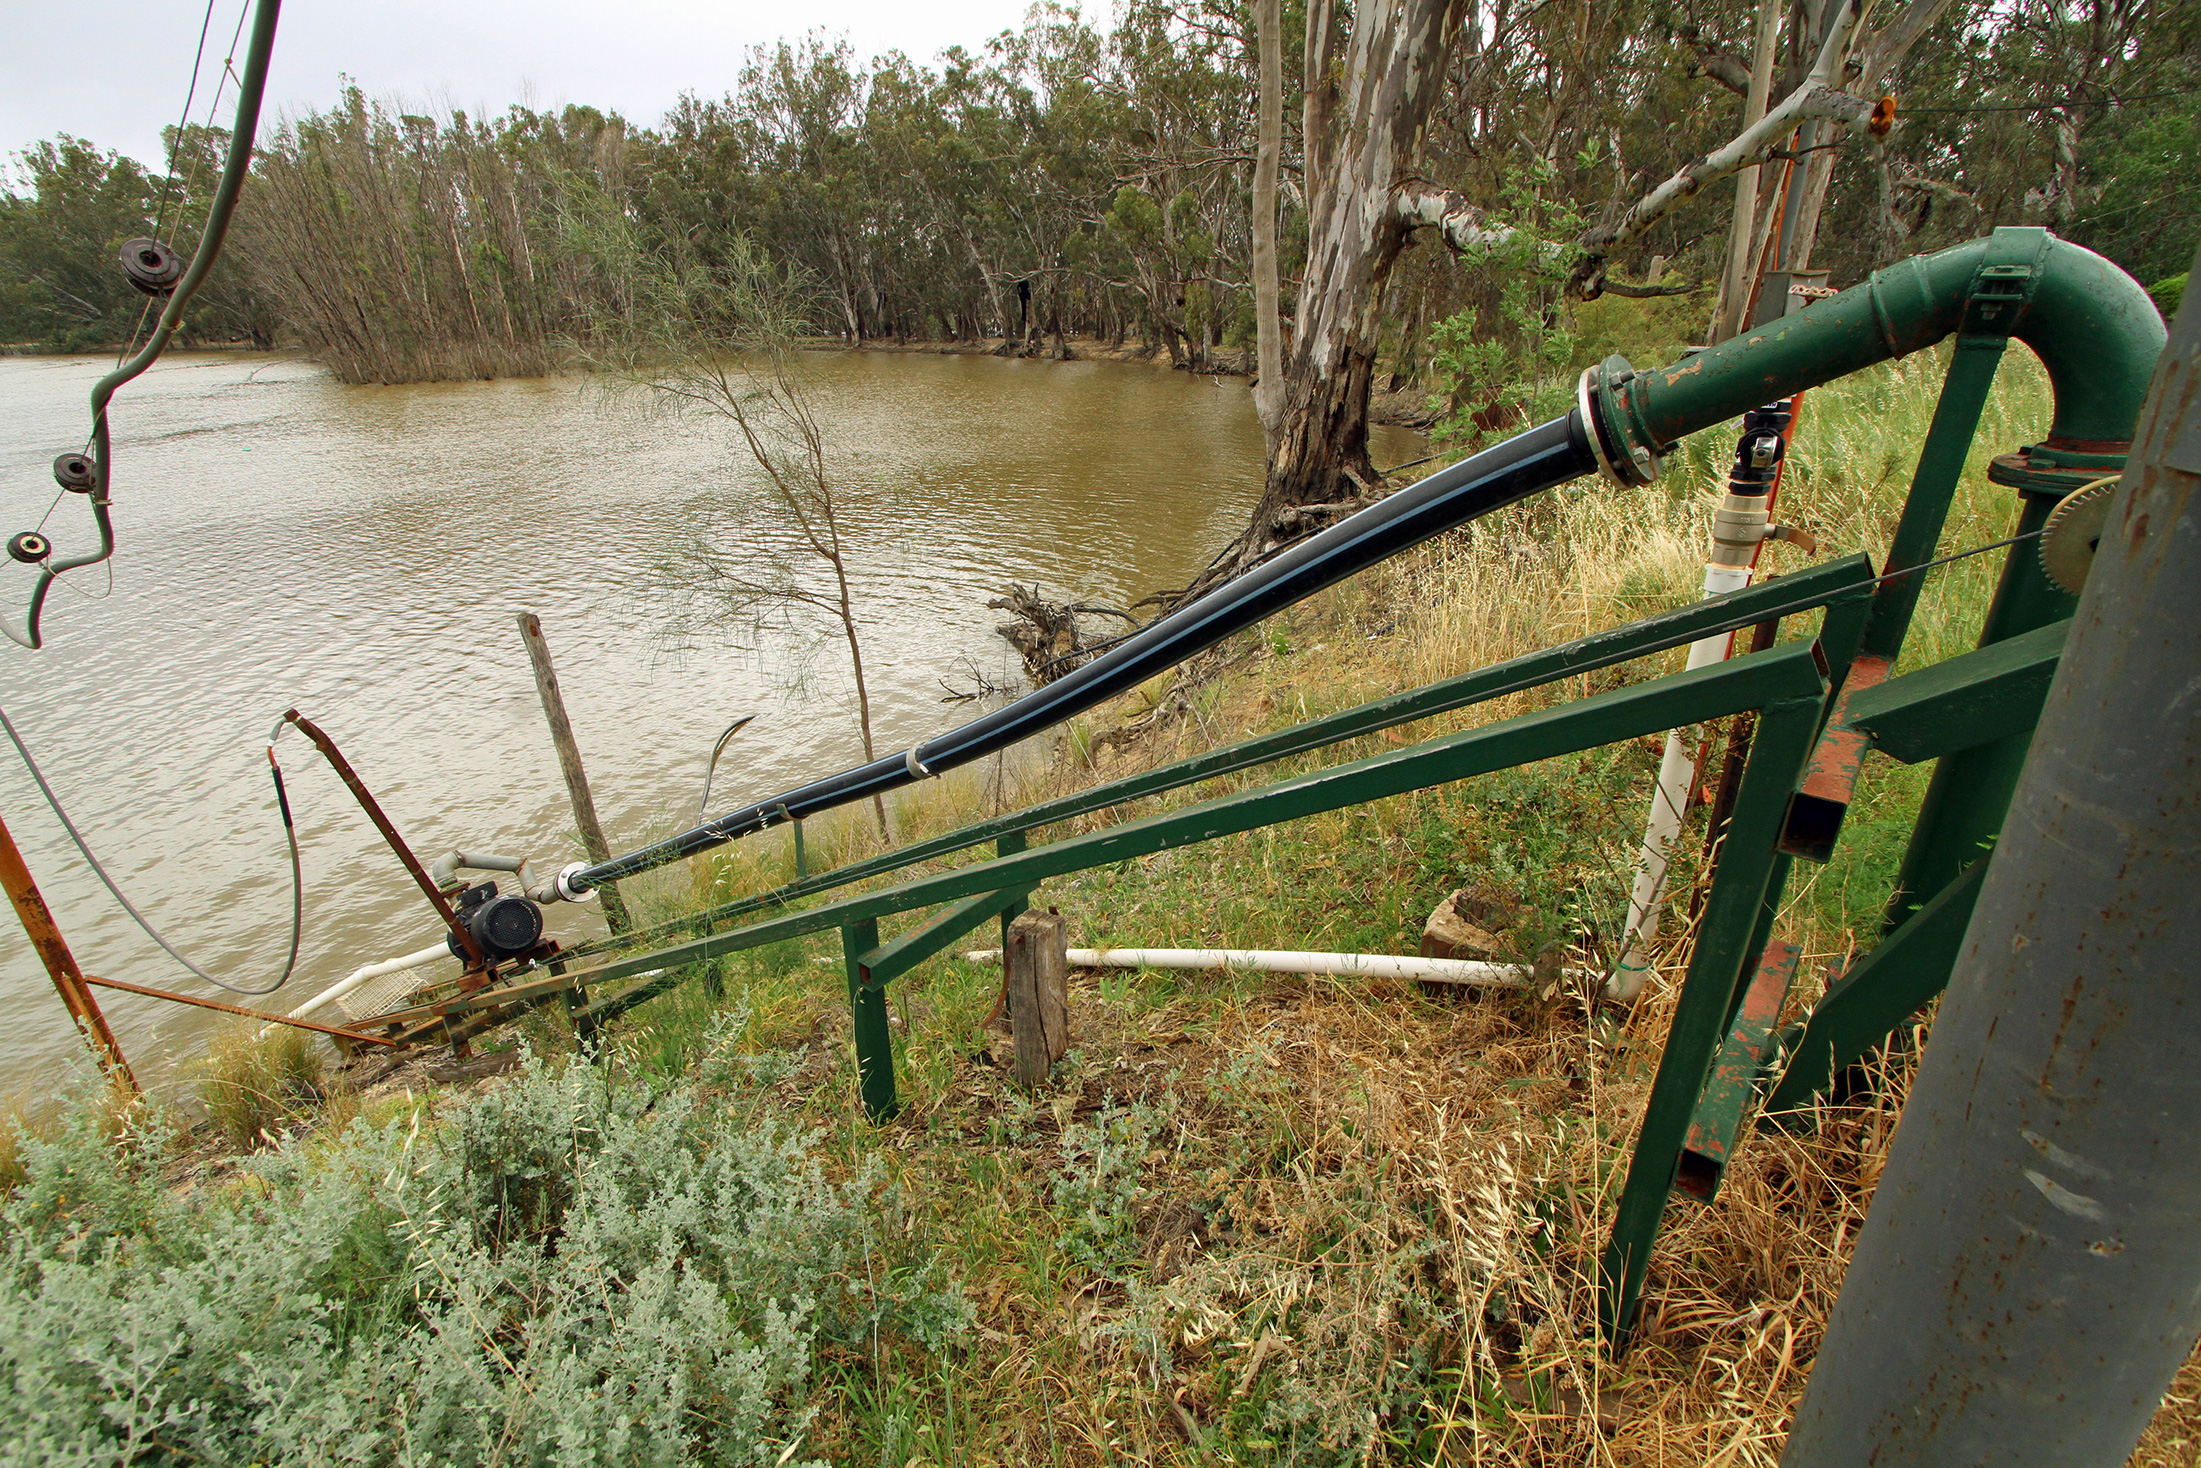 pumping stations, small and large, are extracting the lifeblood of those rivers